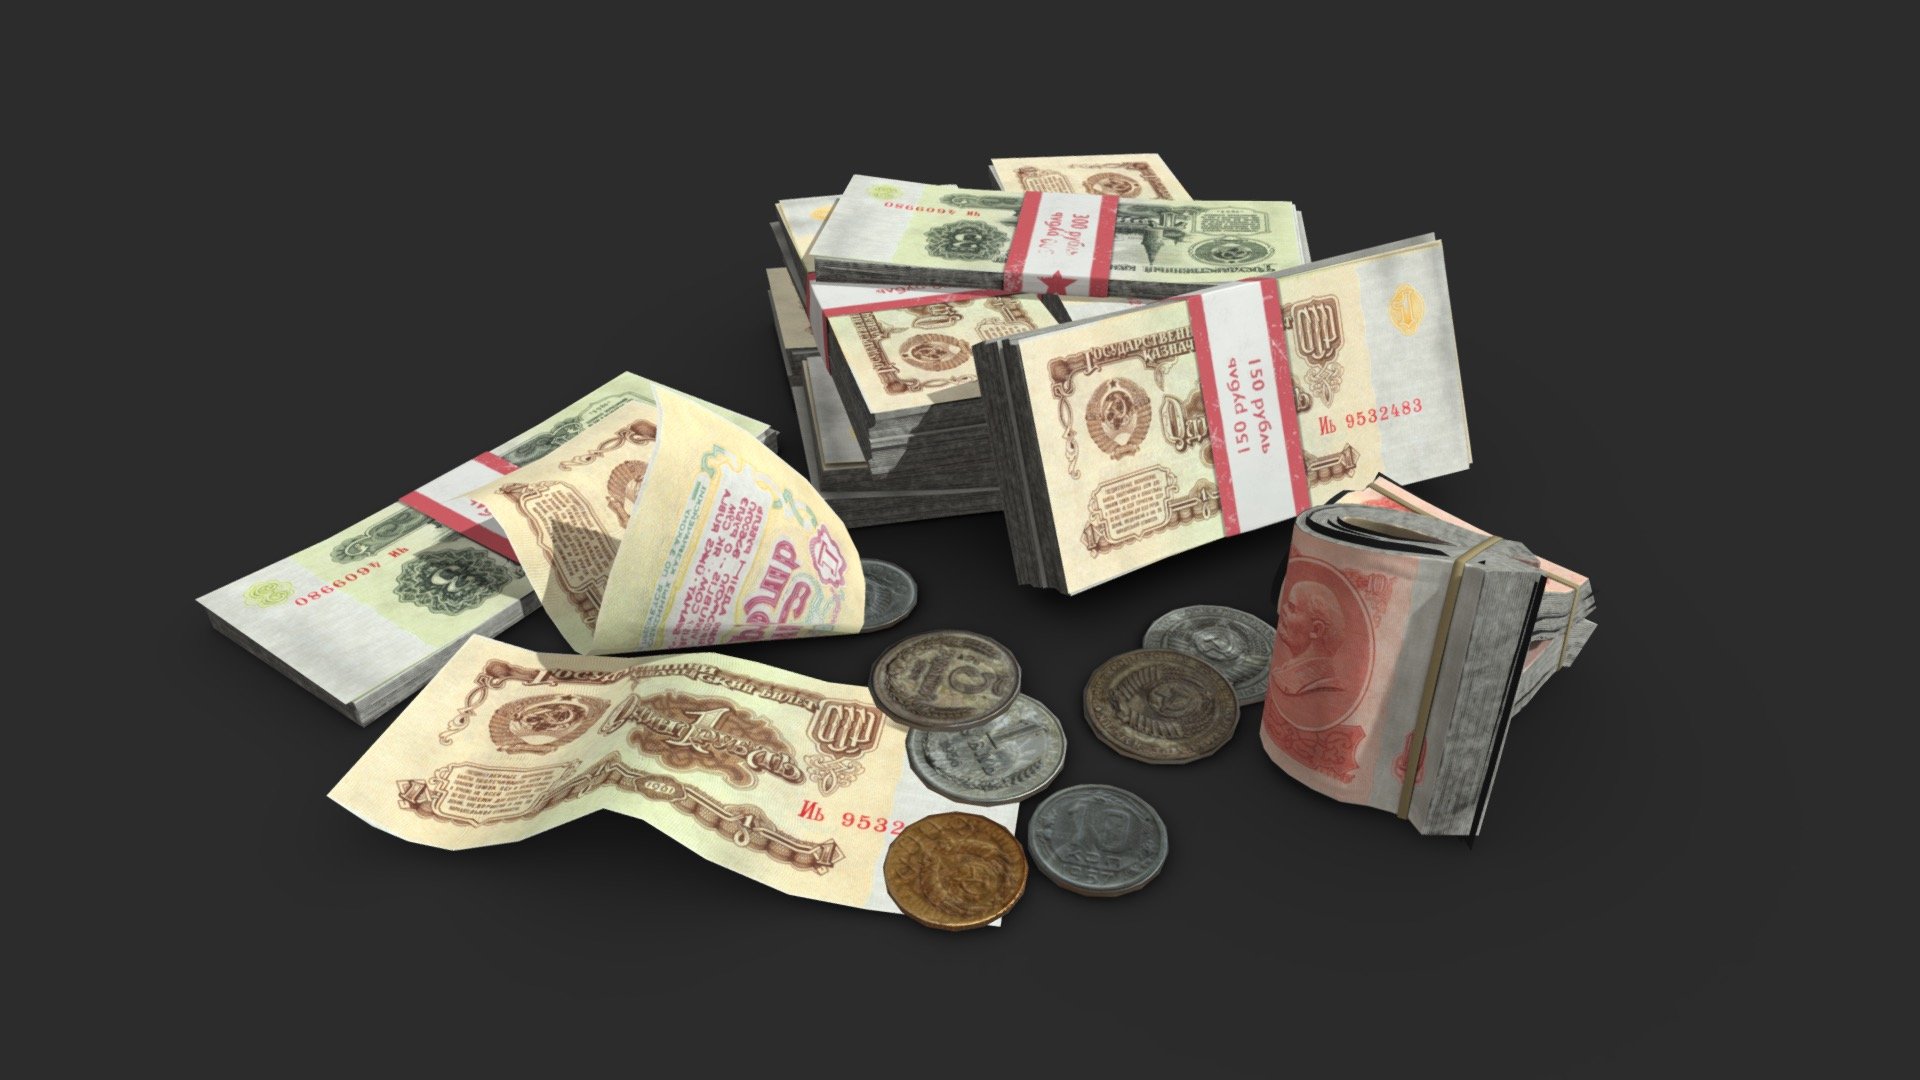 This old Soviet Rubble money loots including banknotes and coins includes 22 objects :




10 individuals banknotes (in 2 values)

4 different coins

3 banknote stacks

The assets can be used in any game (post-apocaliptic, first or third person, GTA like, survival… ). All objects share a unique material for the best optimization for games.

Those AAA game assets pack of money loots will embellish your scene and add more details which can help the gameplay, the game design or the level design.

All textures are PBR ready and available in 4K.

Low-poly model &amp; Blender native 3.1

SPECIFICATIONS




Objects : 22

Polygons : 4541

GAME SPECS




LODs : Yes (inside FBX for Unity &amp; Unreal)

Numbers of LODs : 2

Collider : No

EXPORTED FORMATS




FBX

Collada

OBJ

TEXTURES




Materials in scene : 1

Textures sizes : 4K

Textures types : Base Color, Metallic, Roughness, Normal (DirectX &amp; OpenGL), Heigh &amp; AO (also Unity &amp; Unreal ARM workflow maps)

Textures format : PNG
 - Money Loot - Soviet Rubbles - Buy Royalty Free 3D model by KangaroOz 3D (@KangaroOz-3D) 3d model